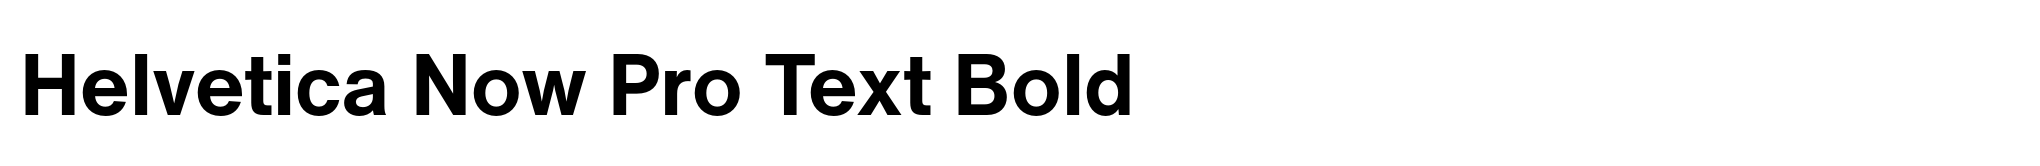 Helvetica Now Pro Text Bold image